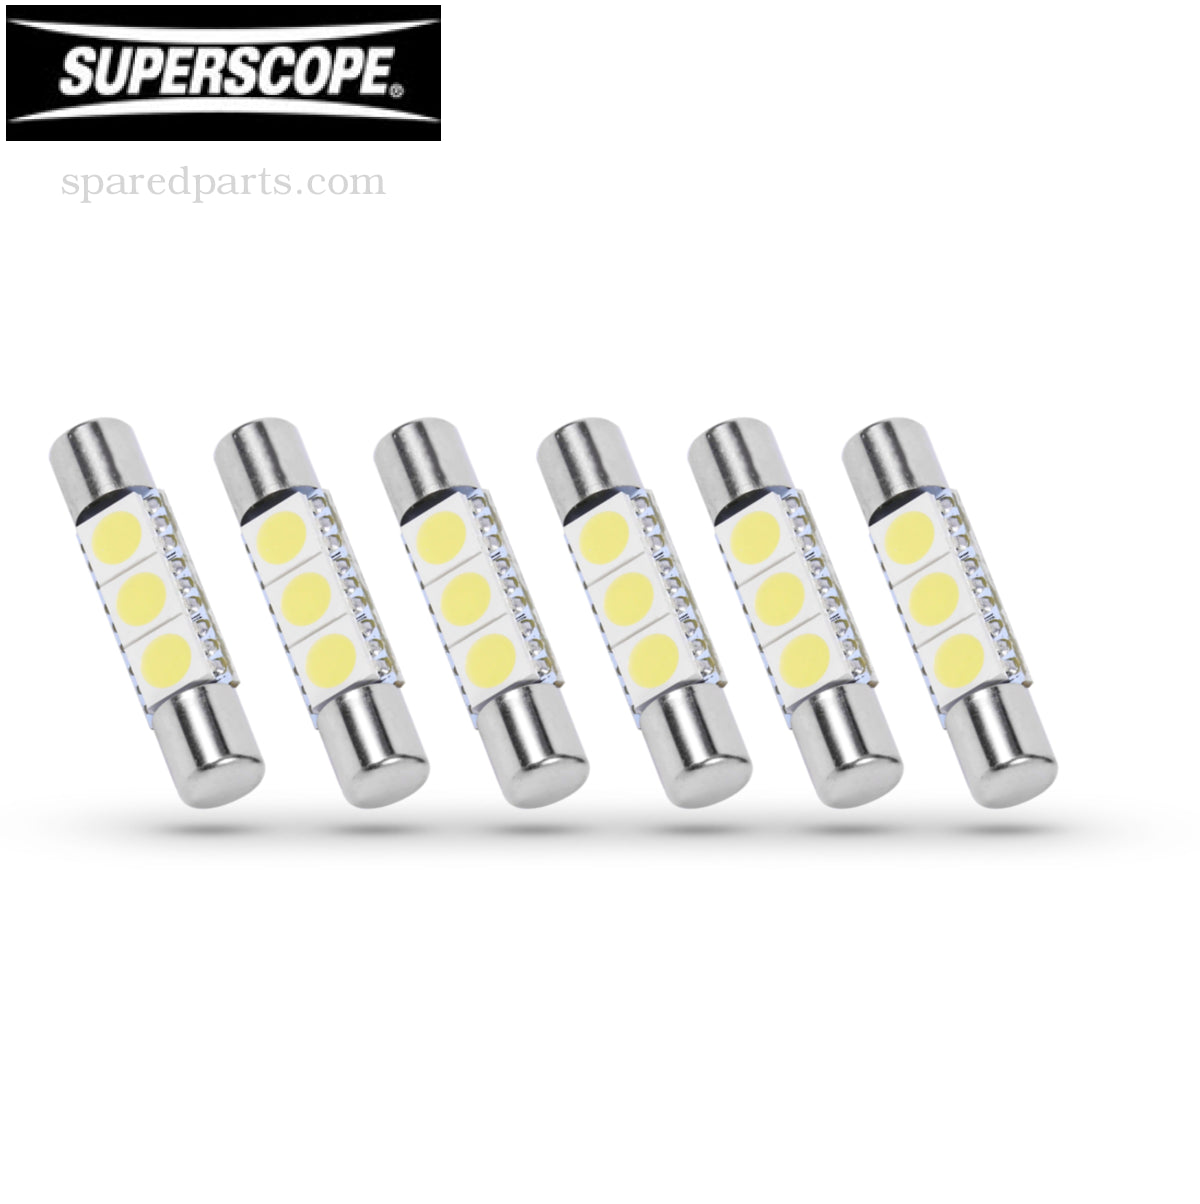 Superscope Fuse Type Lamps (LED Upgrade)